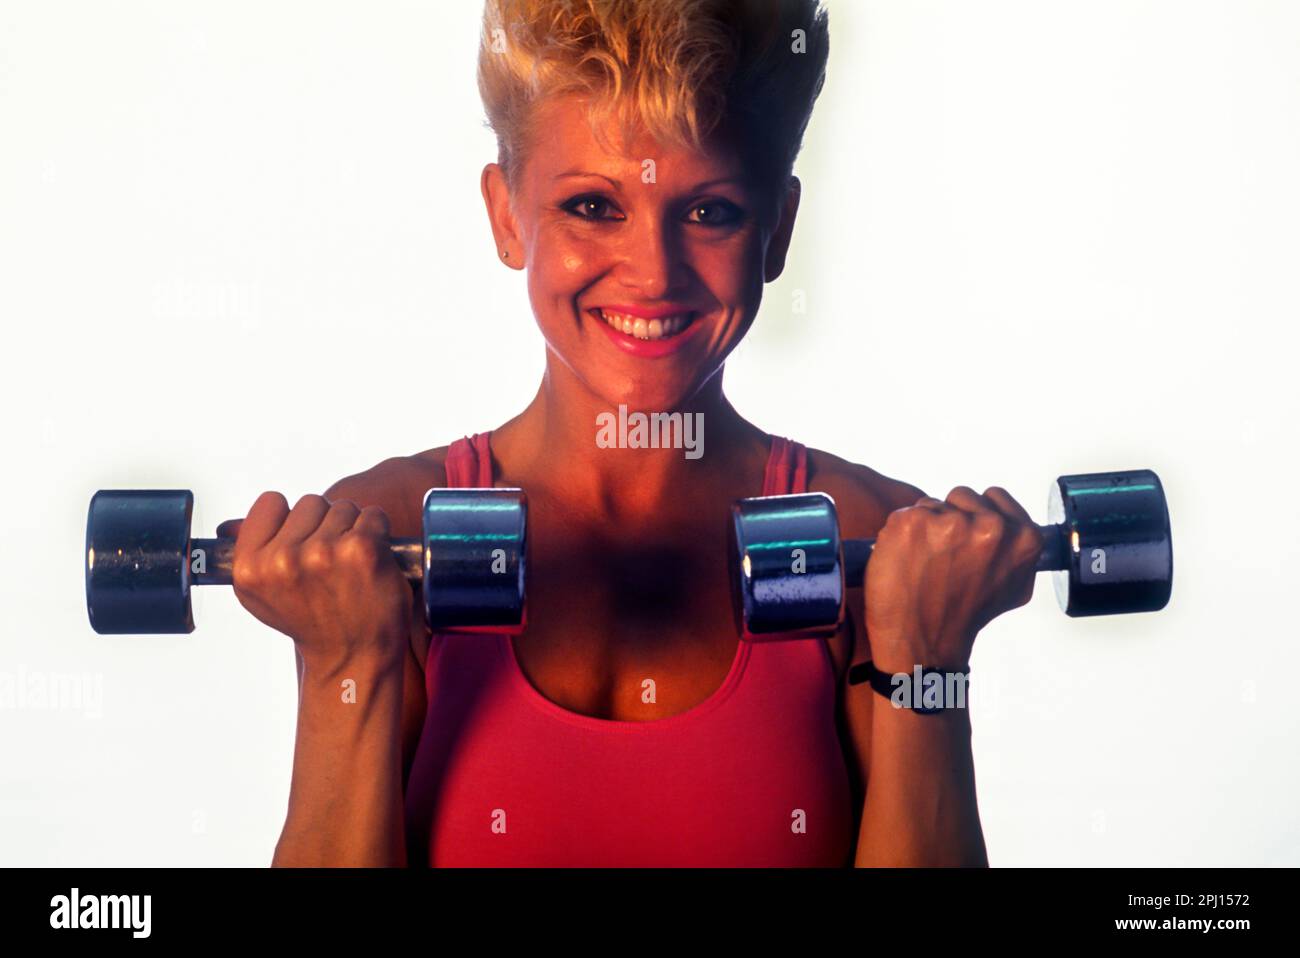 GYM YOUNG WOMAN WEIGHT LIFTER FLEXES ARM MUSCLES Stock Photo